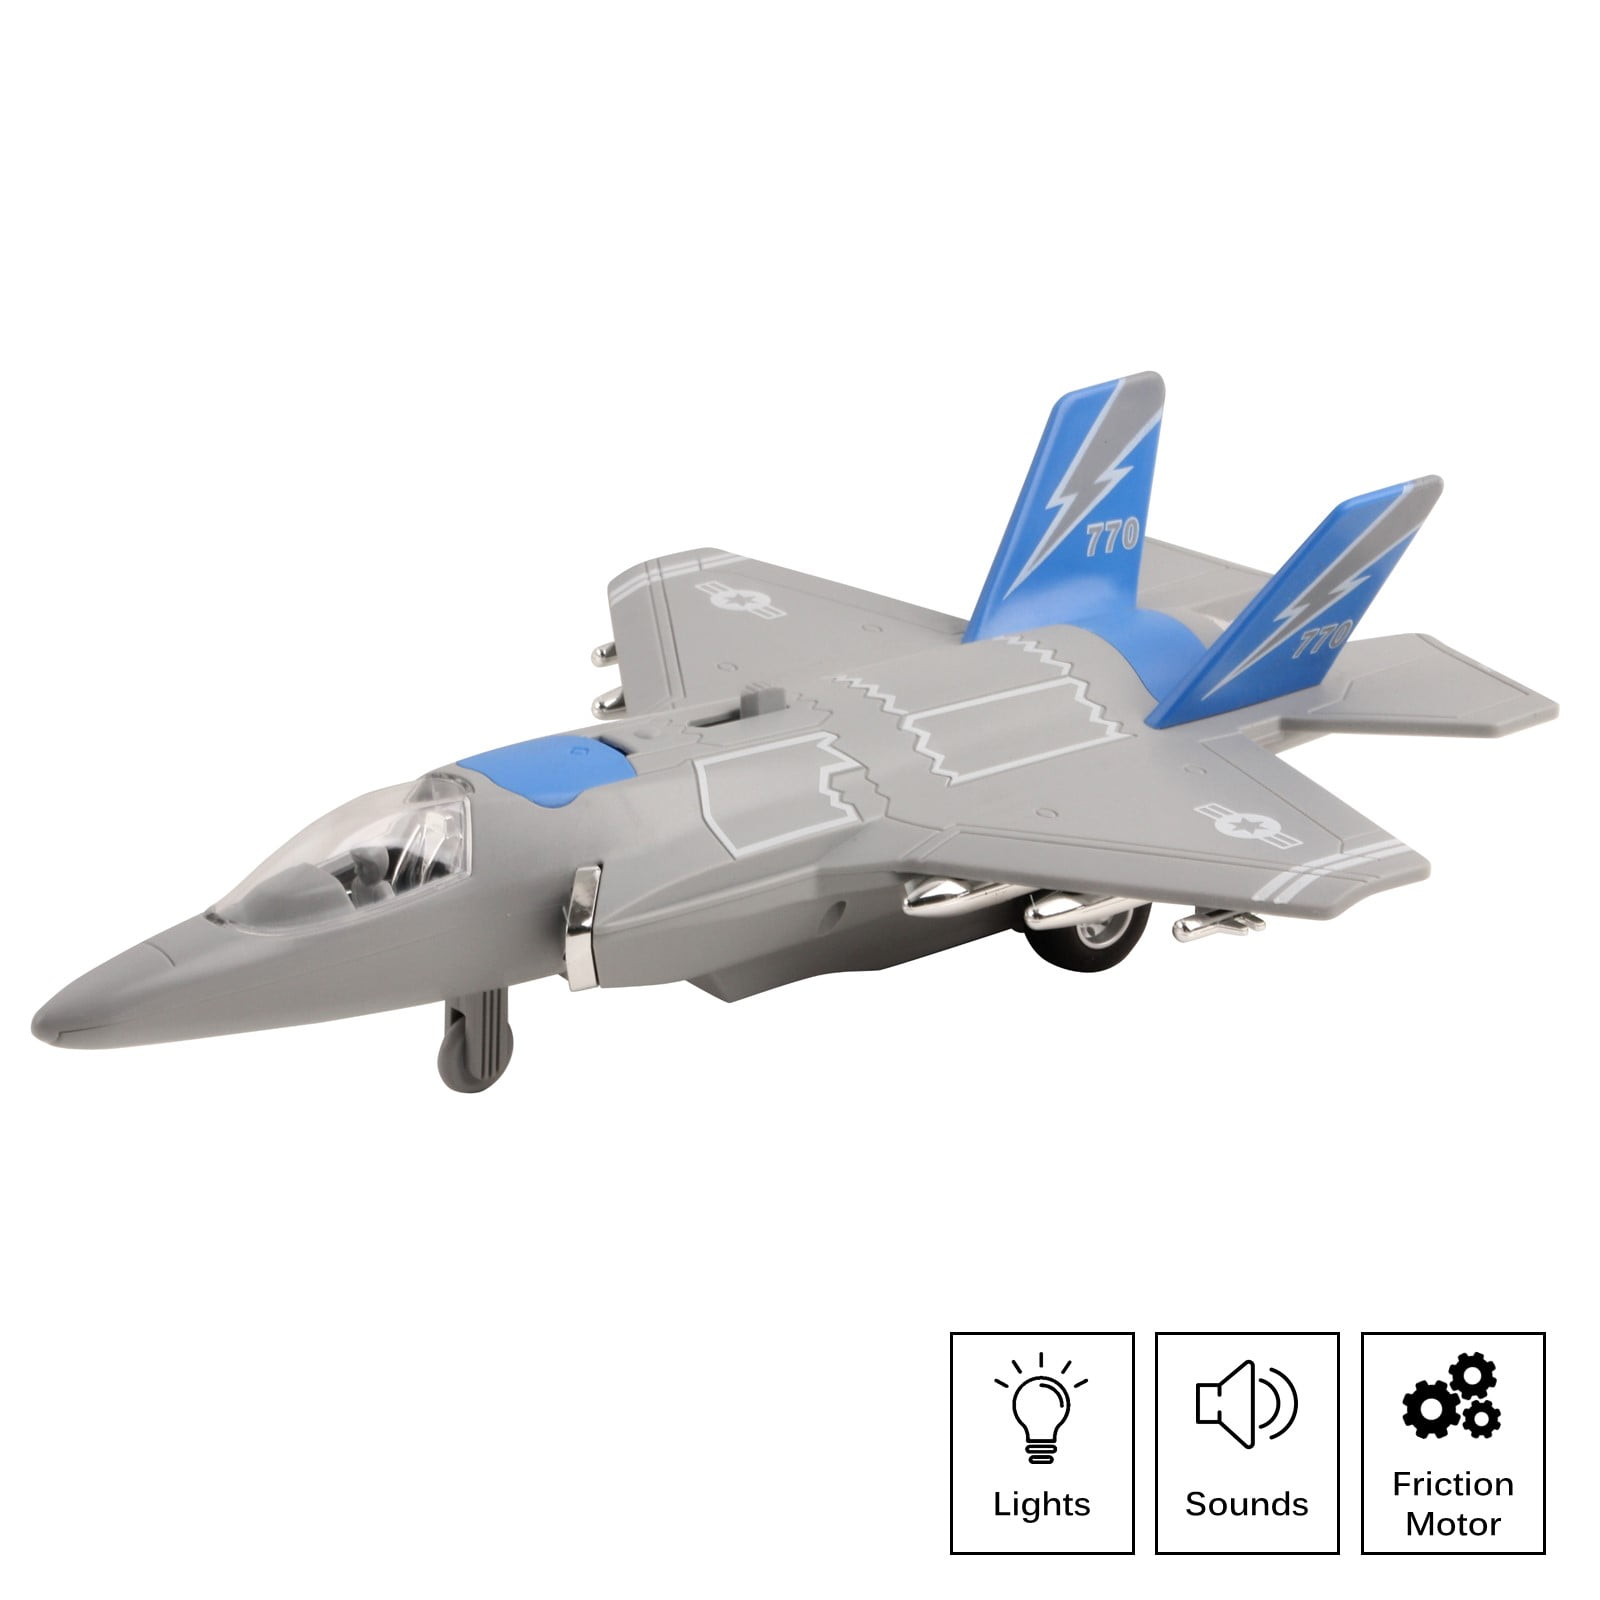 4 DIECAST FIGHTER JETS AIRPLANES QUALITY COLOURS KIDS AIRCRAFT TOYS VEHICLE GIFT 